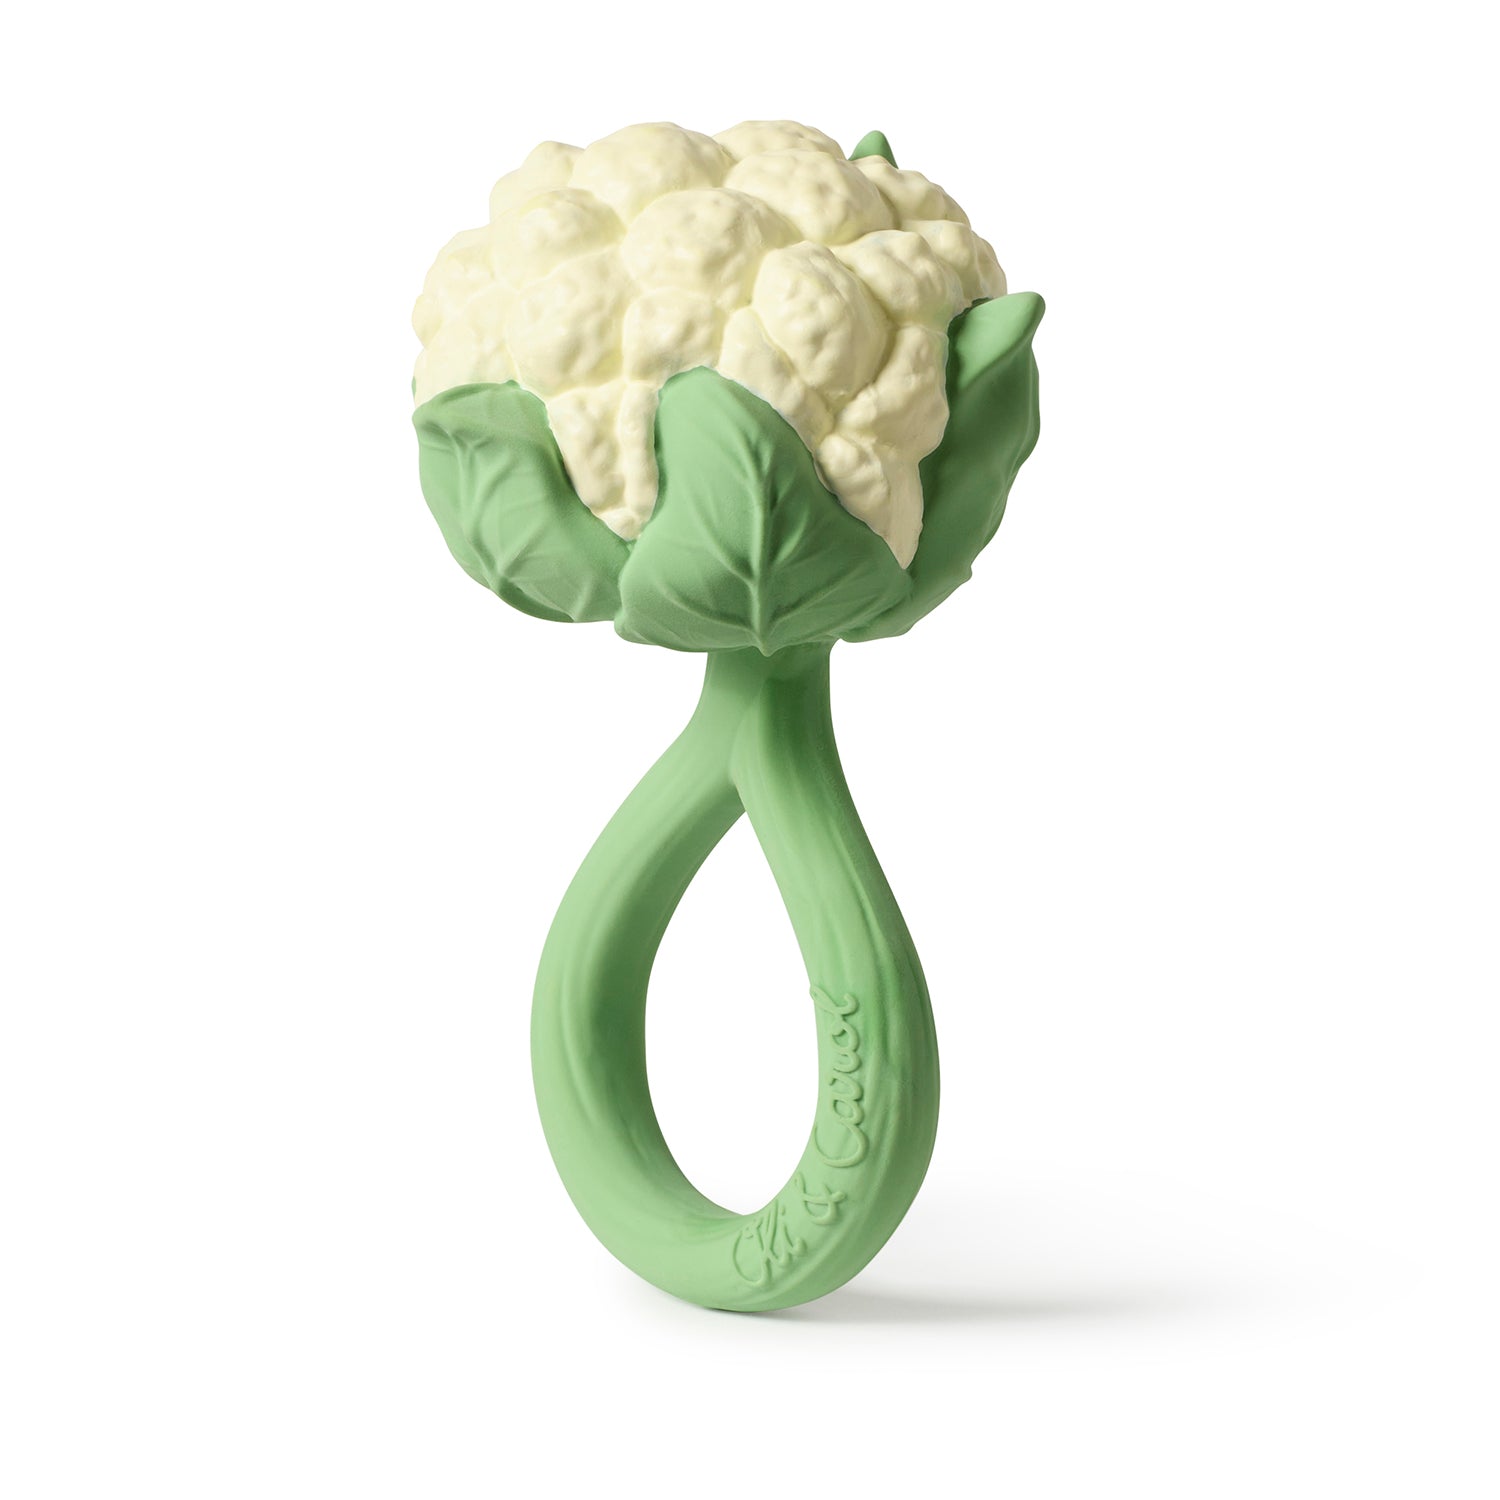 Tomatoes Chewable Rattle by Oli & Carol